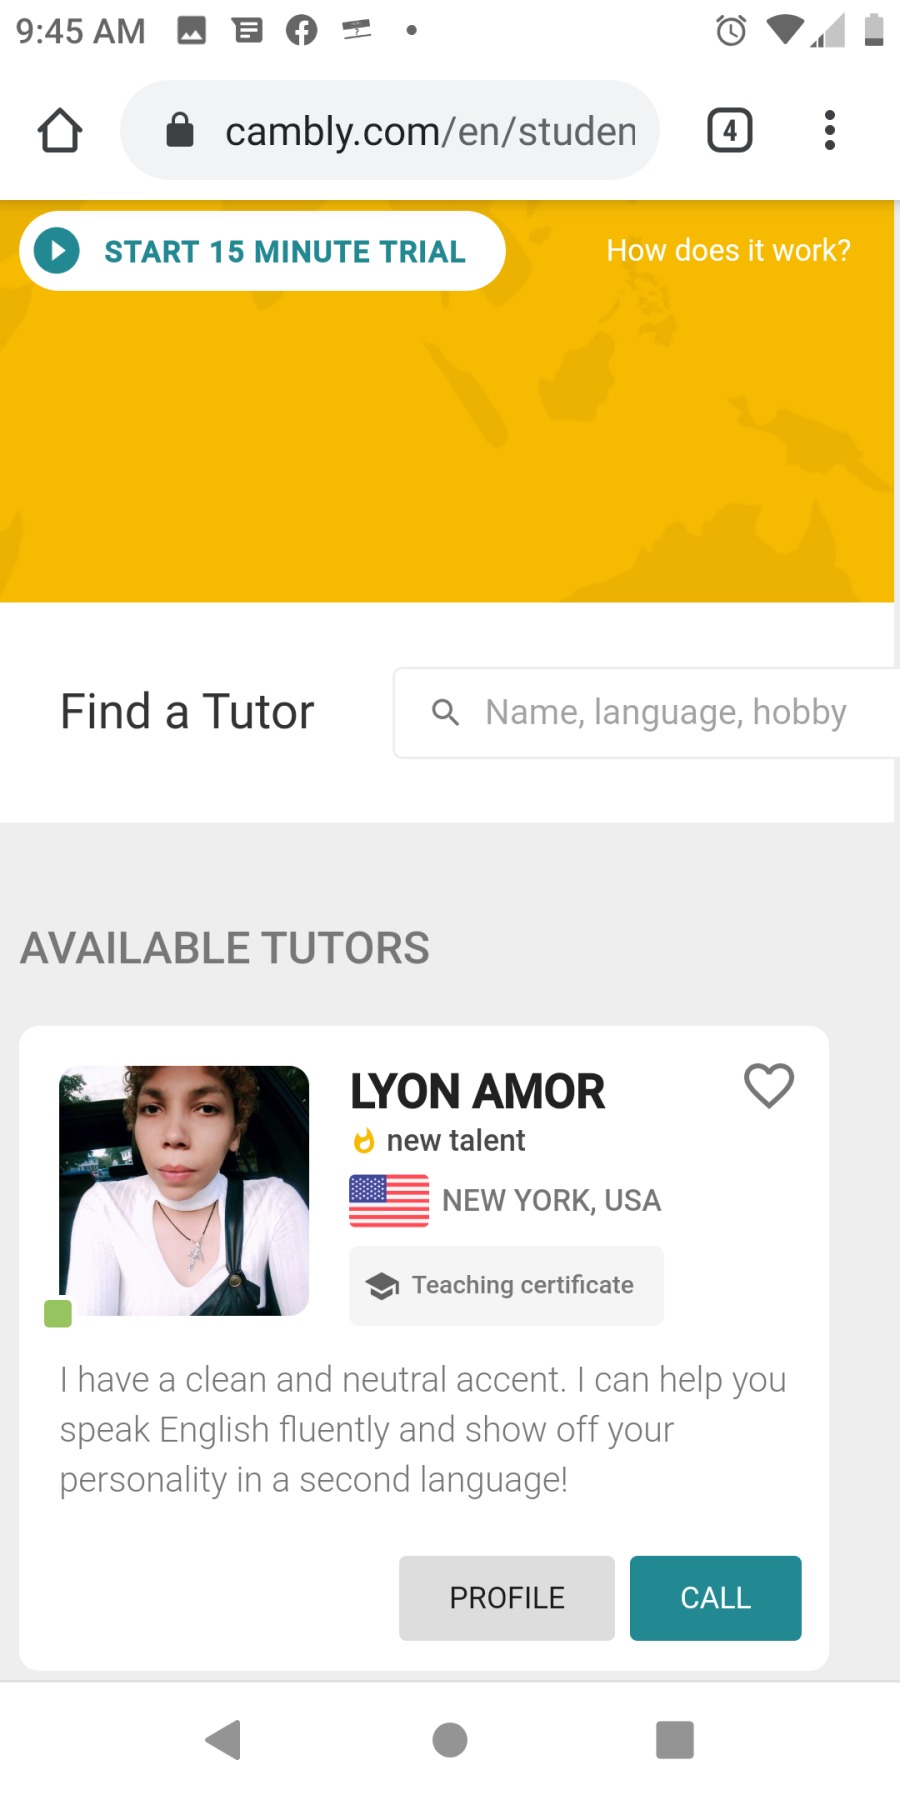 9:45AM MB OQ = - O®ia

{O @& cambly.com/en/studen (a)

© START 15 MINUTE TRIAL Eee

 

Find a Tutor Q Name, language, hobby

AVAILABLE TUTORS

LYON AMOR Q

© new talent

BE= \Ew YORK, USA

  

< @ Teaching certificate
a | 4 9g
| have a clean and neutral accent. | can help you

speak English fluently and show off your
personality in a second language!

<4 ® [|